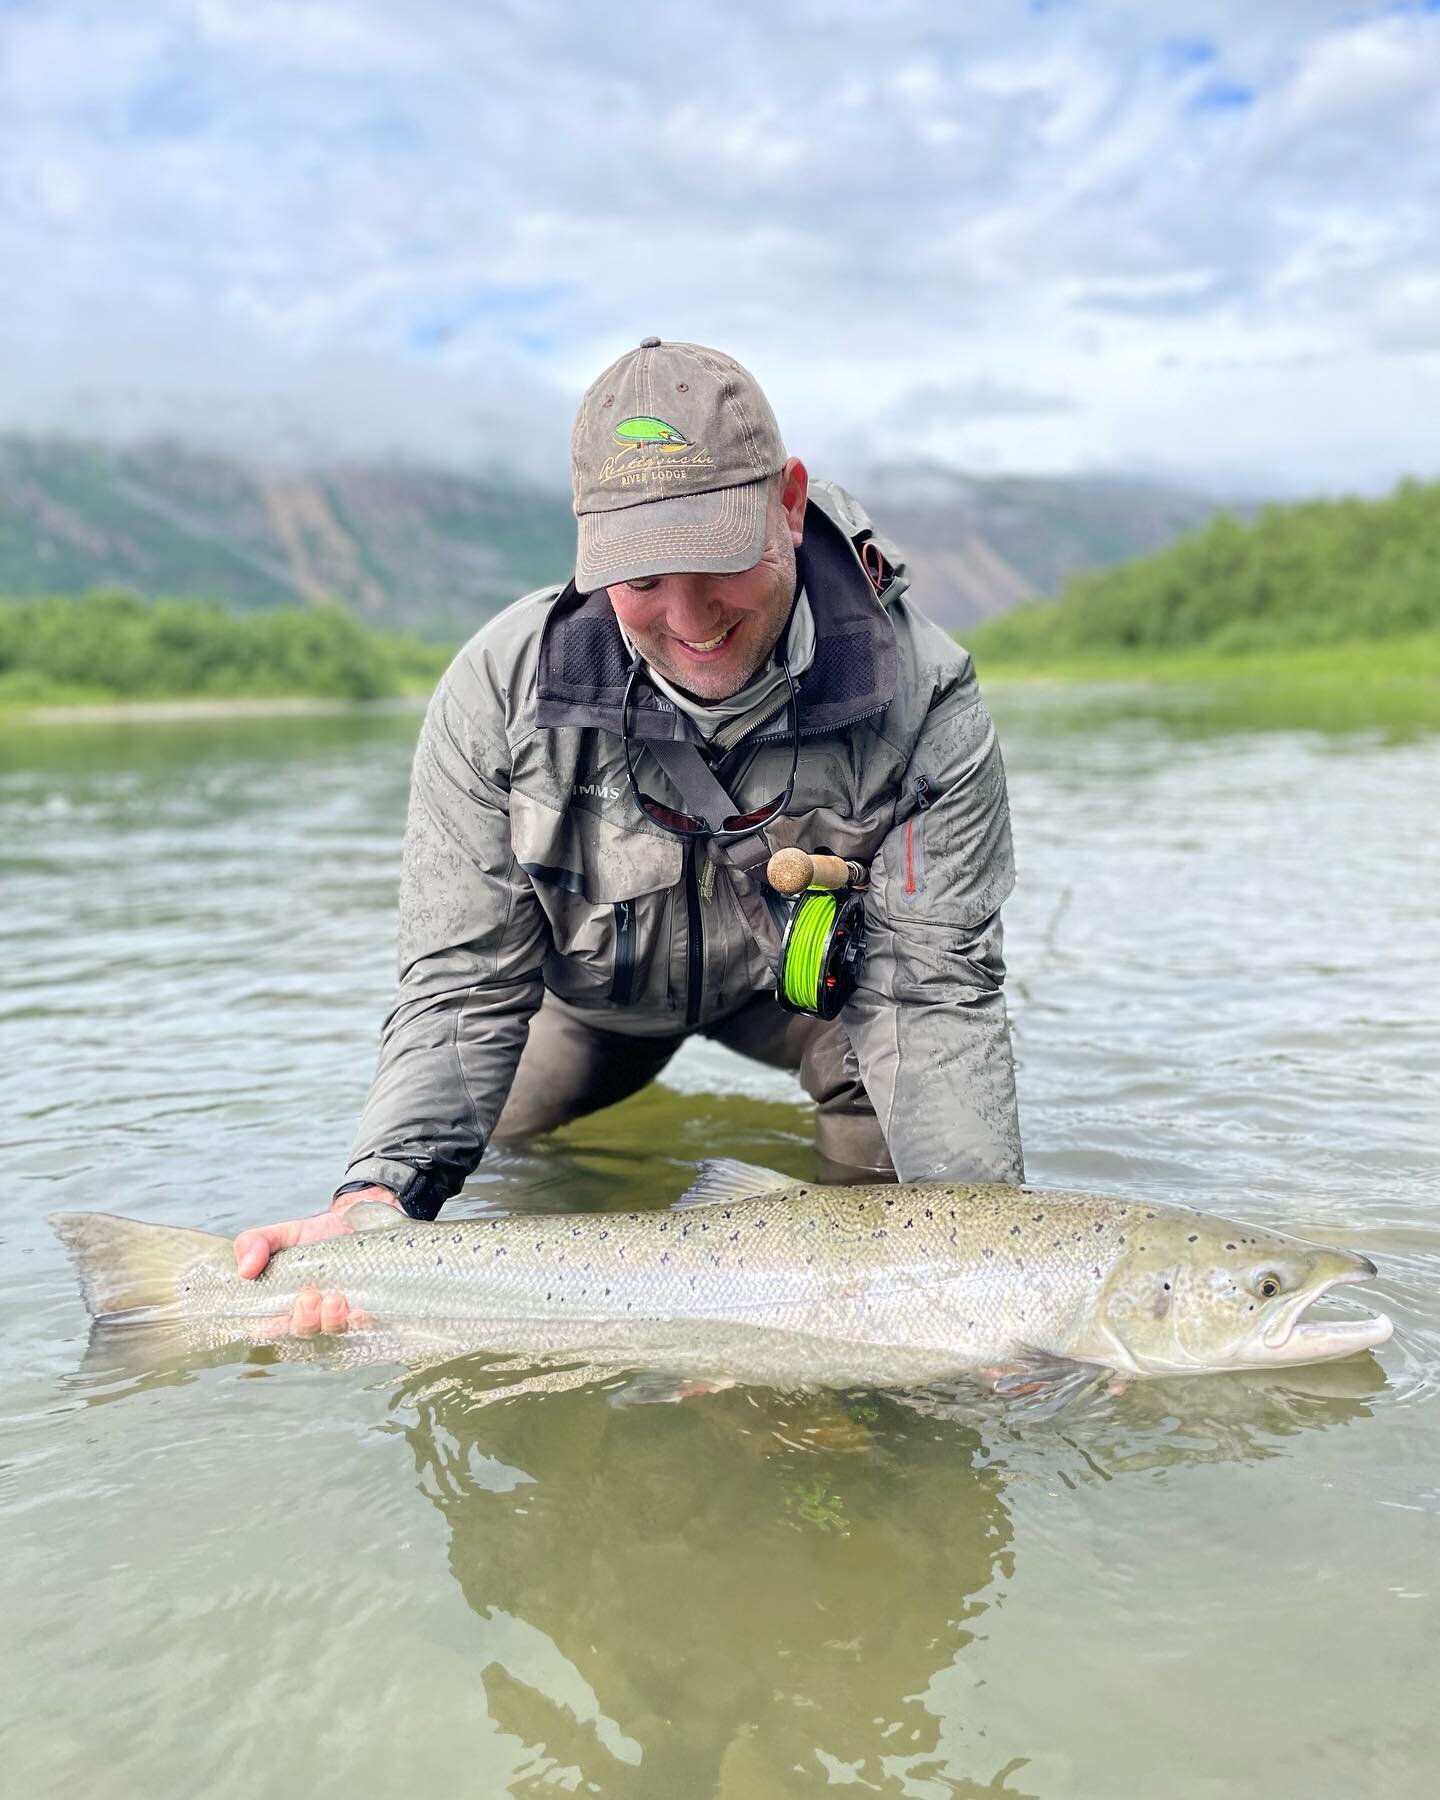 Job well done.! When client and guide work together on Older&oslash; usually makes everything come together, here a really nice fish from Bridge pool on Homen.
&bull;
&bull;
#older&oslash; #norway #older&oslash;flyfishinglodge #flyfishing #fliegenfis